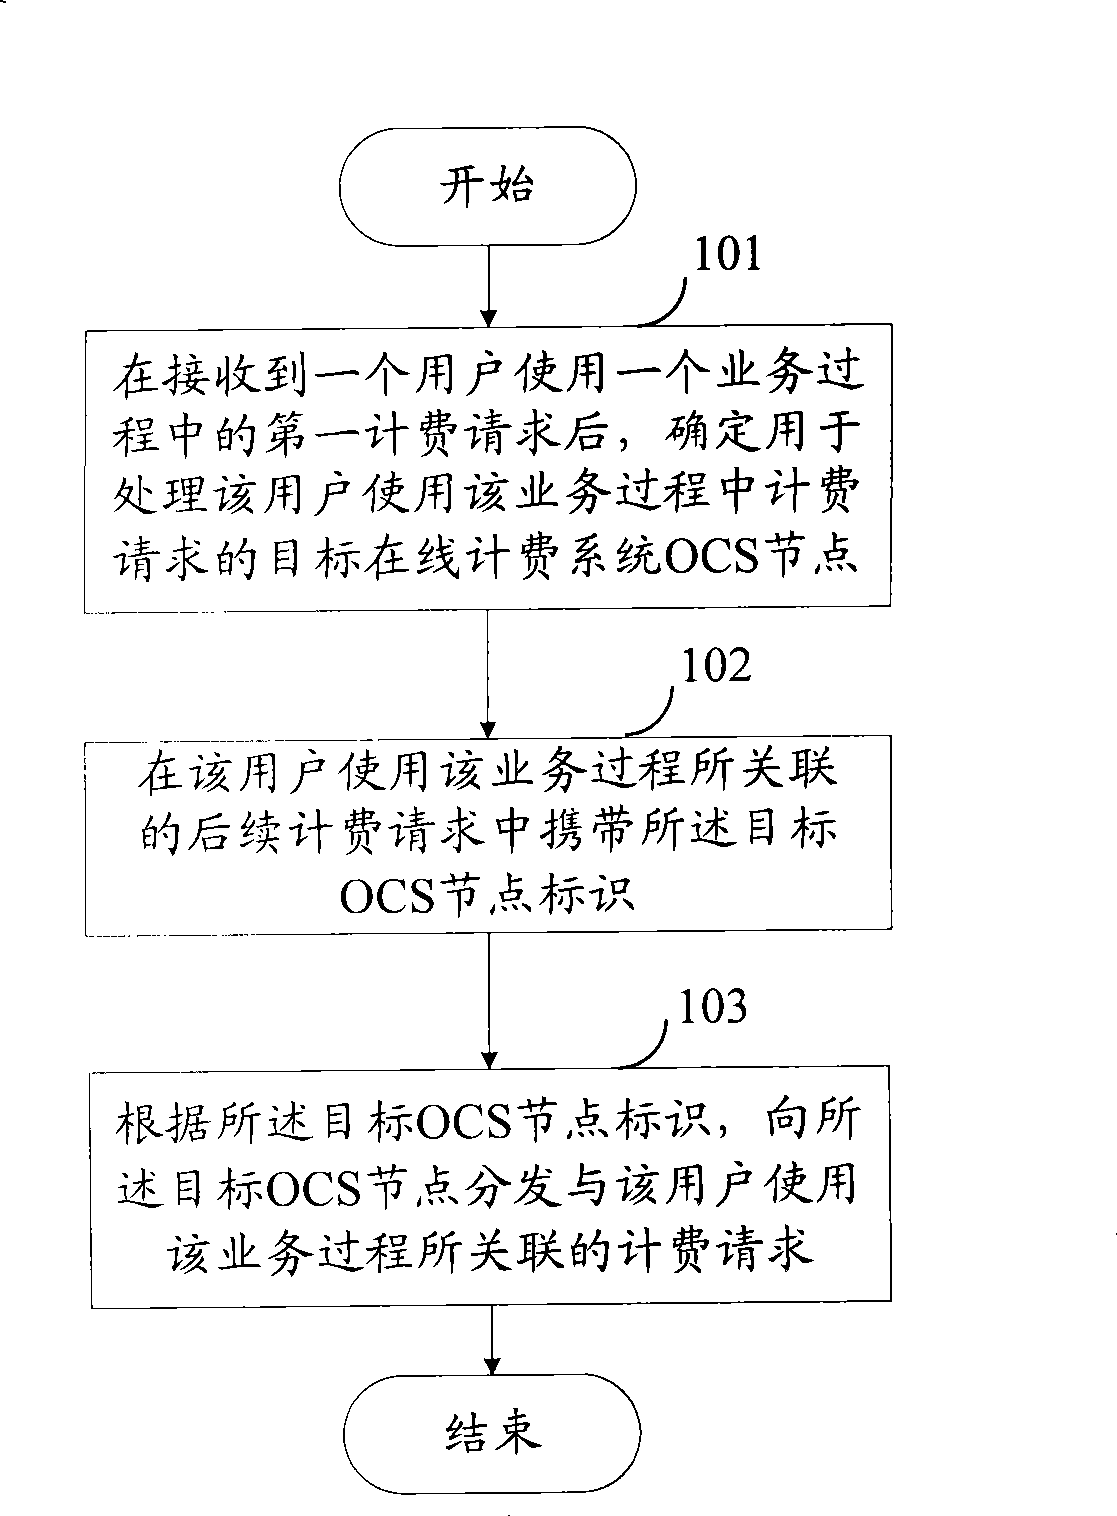 Method and system for processing charging request, method and apparatus for triggering and distributing charging